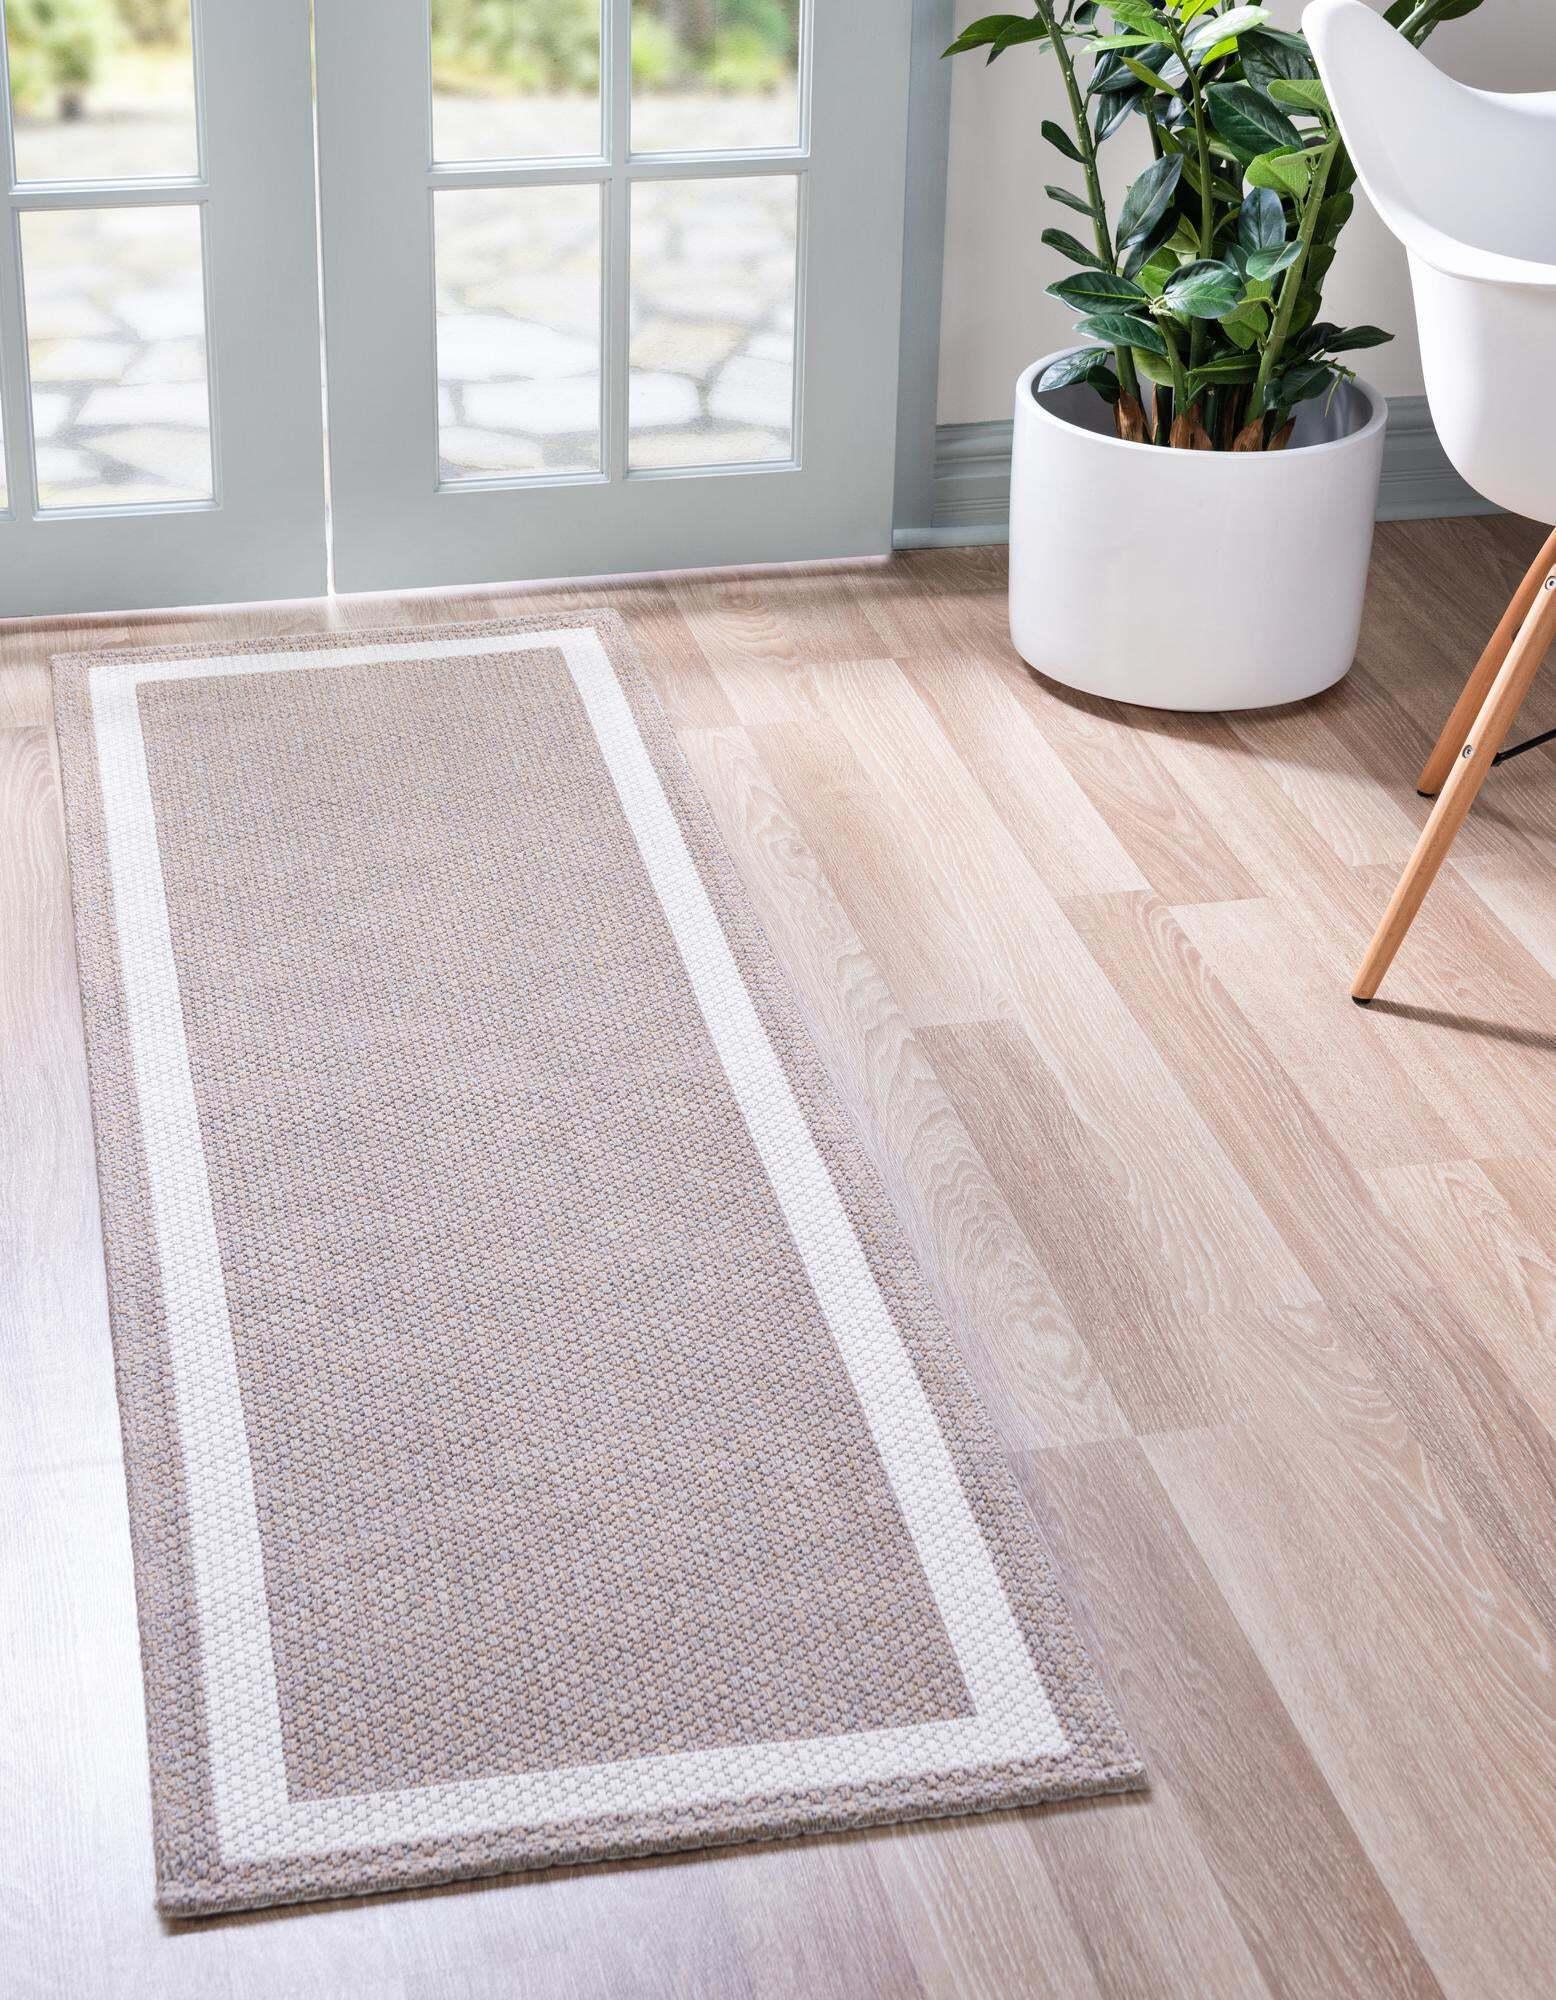 Unique Loom Indoor Rugs - Decatur Border 6 Ft Runner Rug Taupe & Ivory